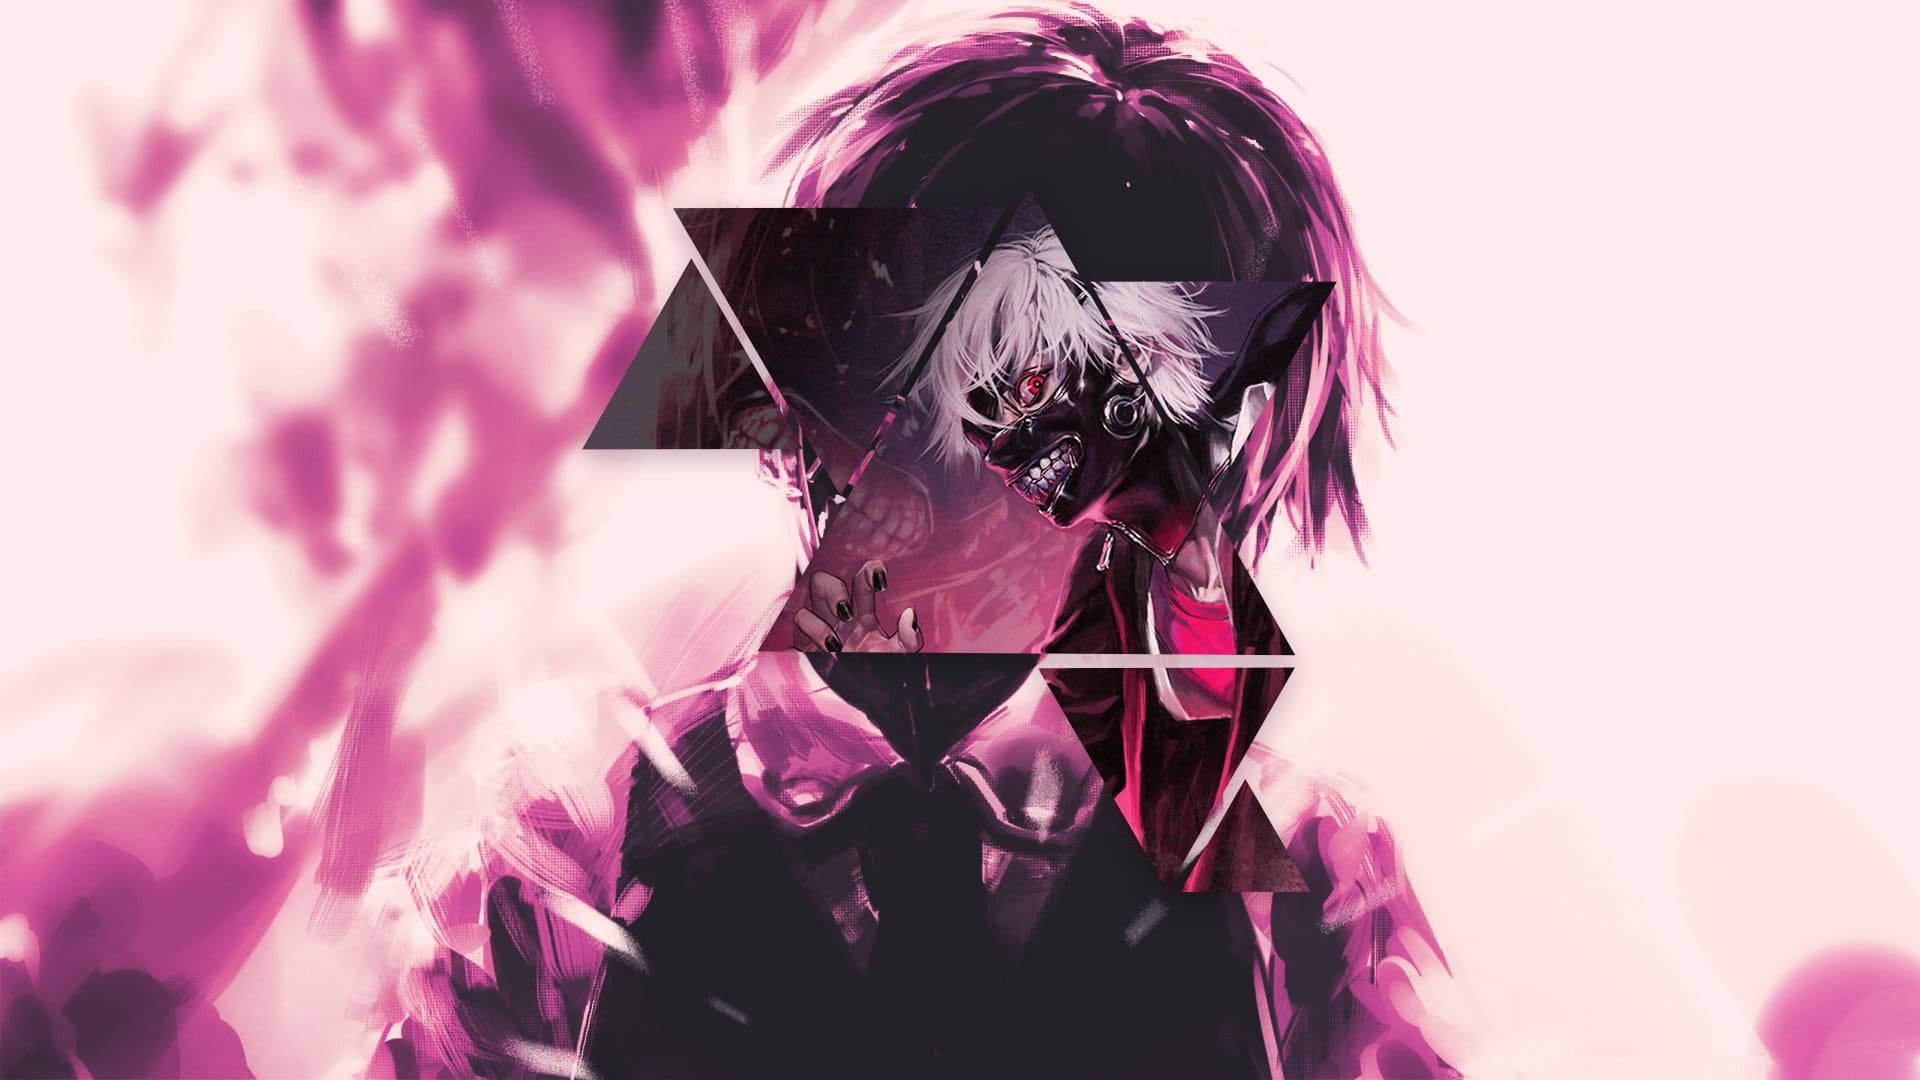 A Tokyo Ghoul Aesthetic That's Mesmerizing Wallpaper